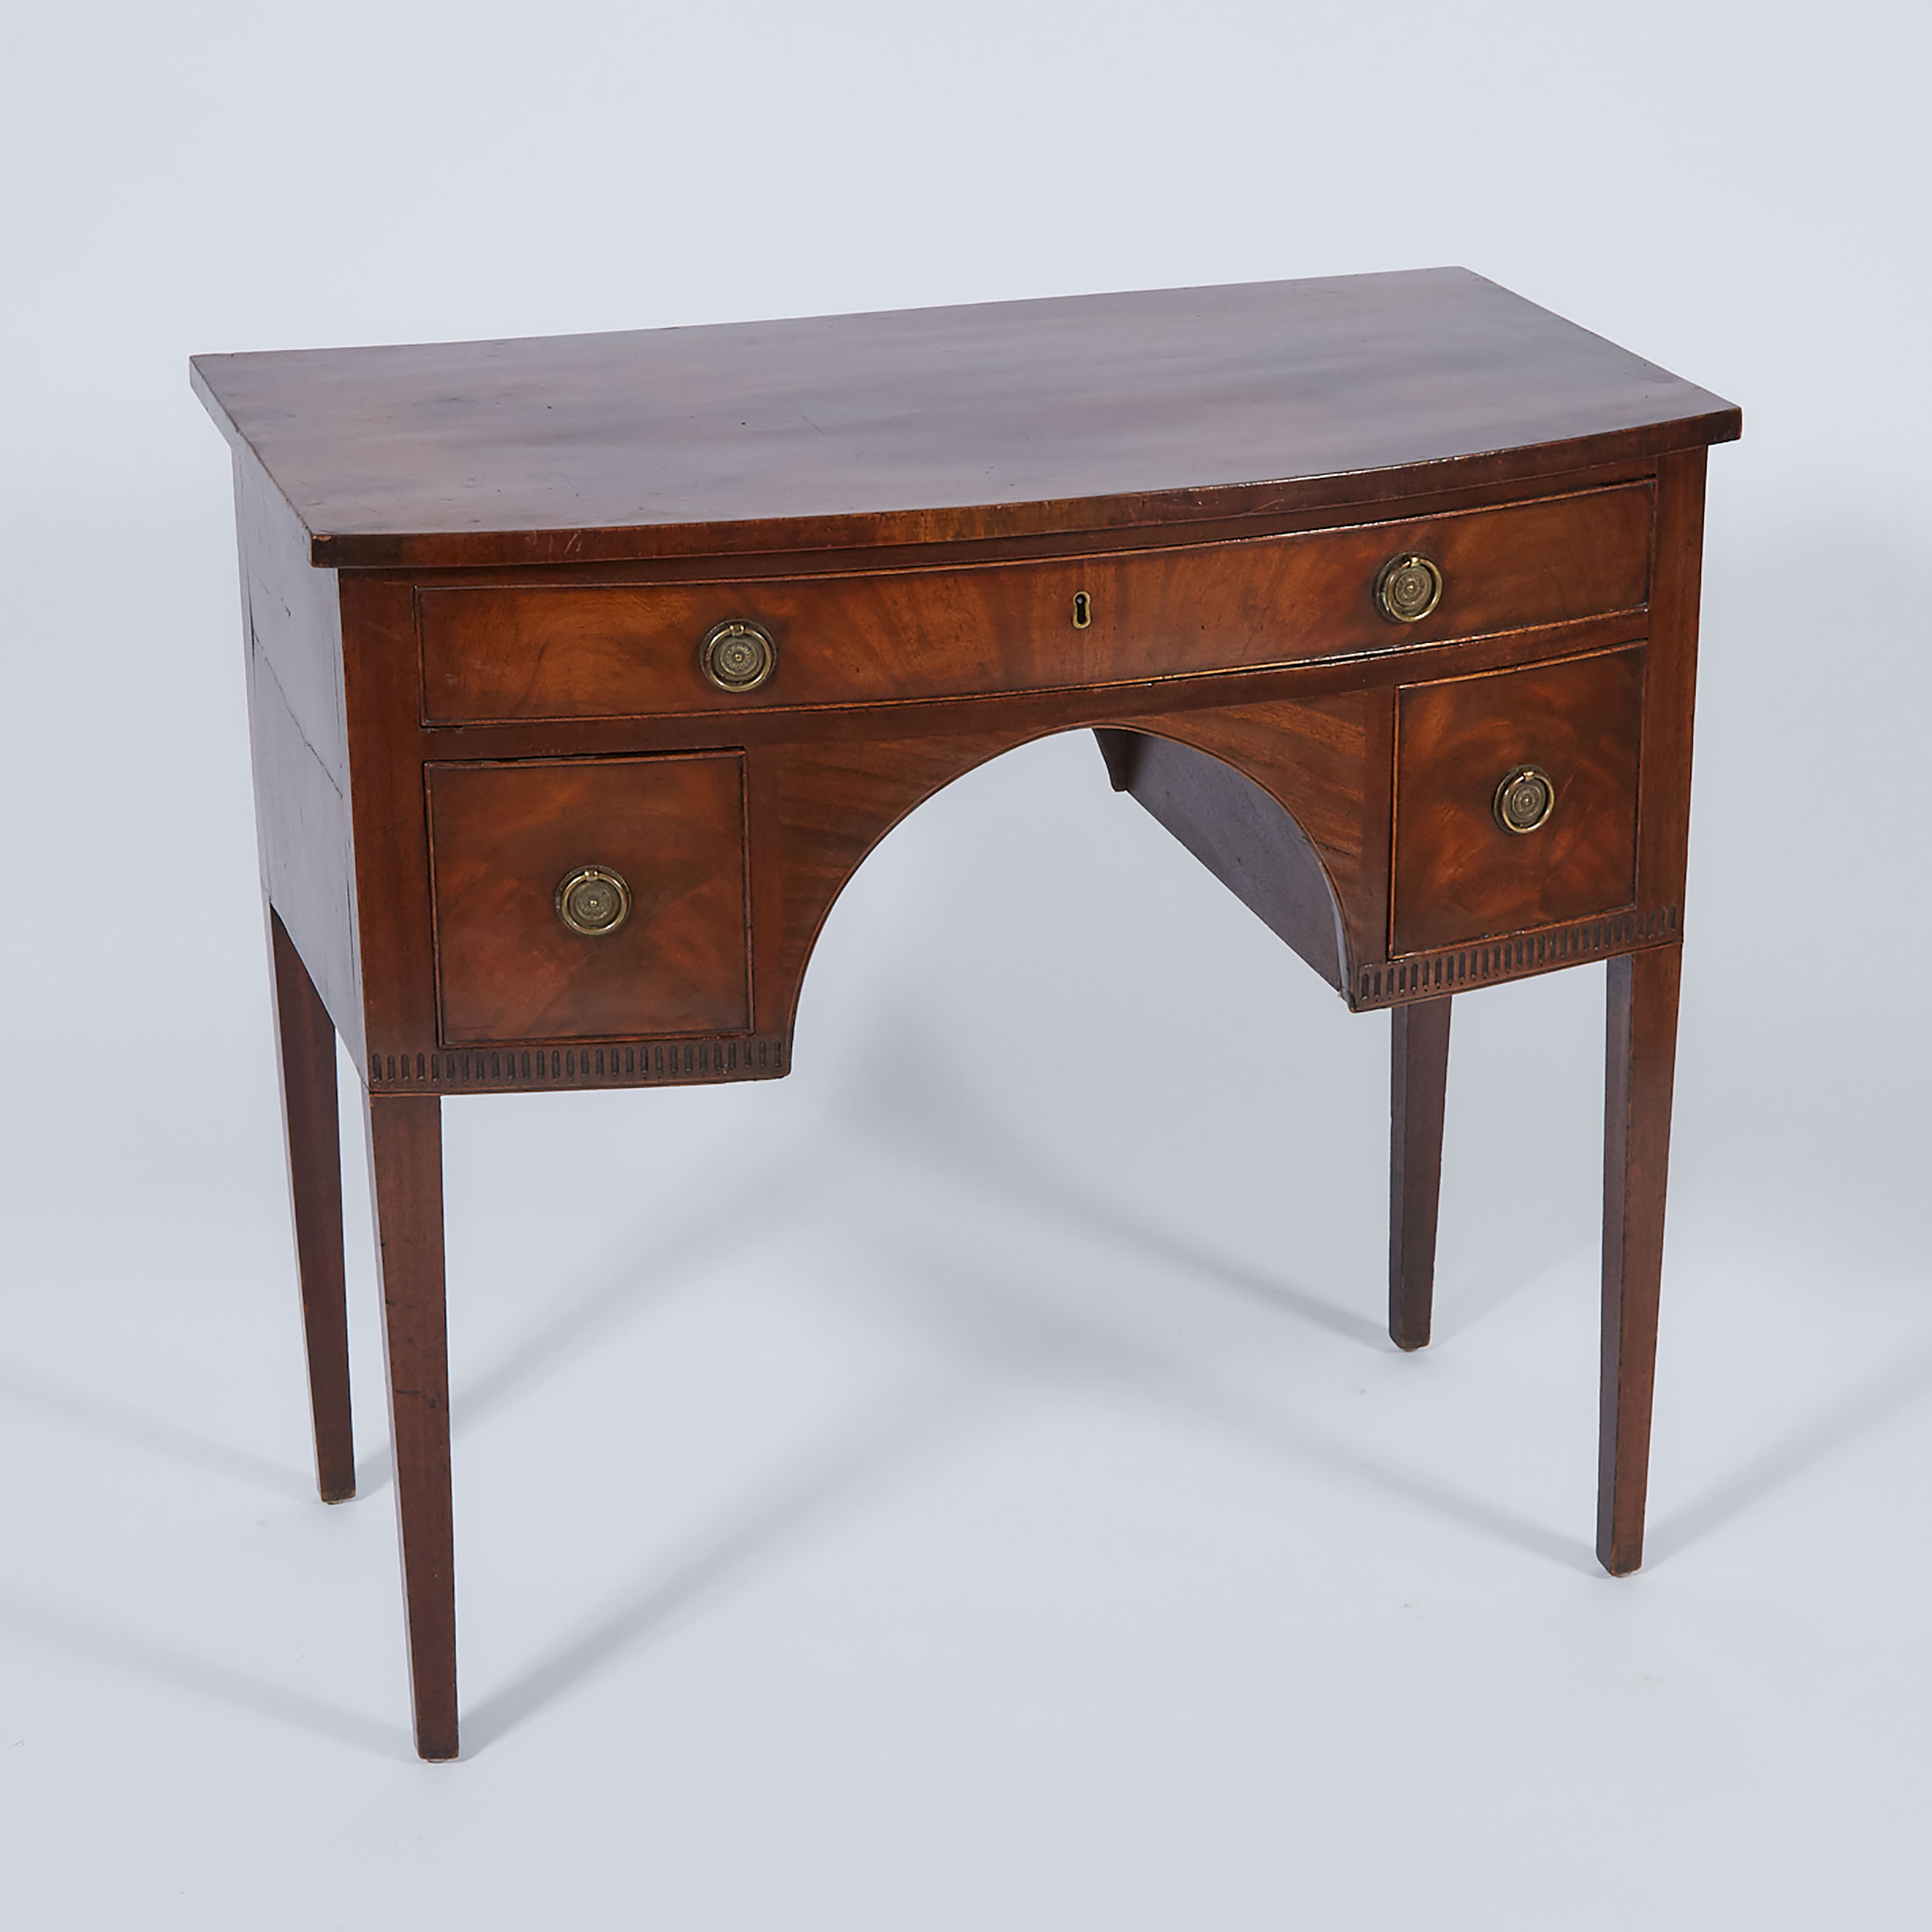 Sheraton Style Kneehole Dressing Table, early 19th century